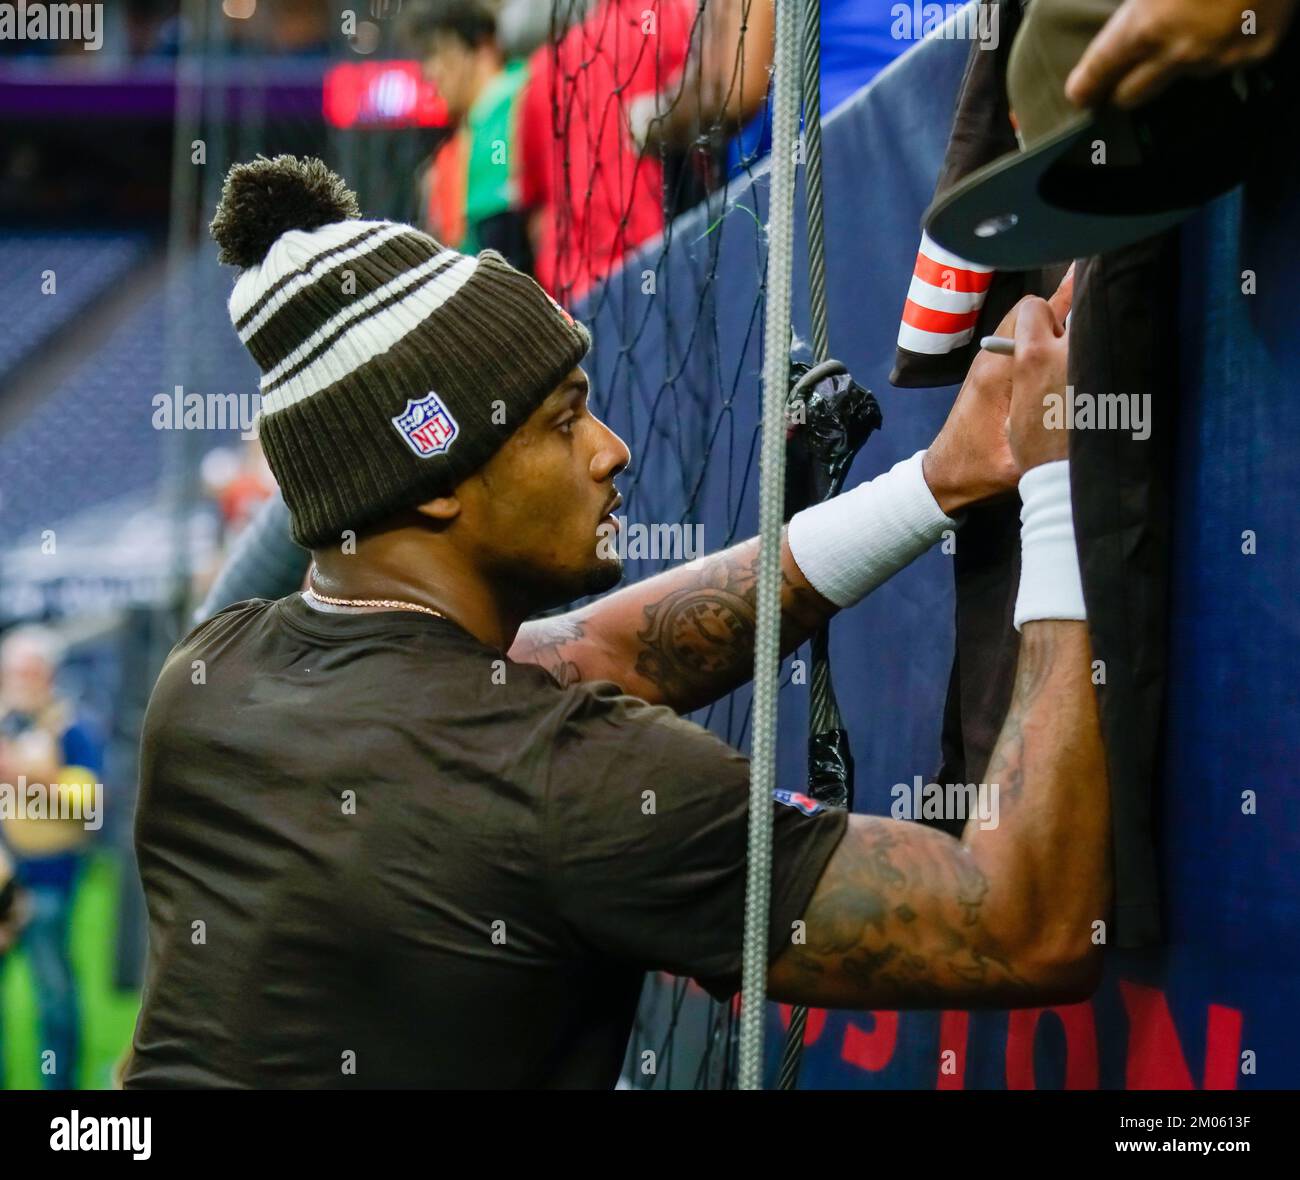 Houston, Texas, U.S. 04th Dec, 2022. Cleveland Browns quarterback DESHAUN WATSON (4) signs autographs and greets fans pregame as he prepares for the game between the Cleveland Browns and the Houston Texans in Houston, Texas at NRG Stadium. DESHAUN WATSON (4) returns to football after a 11 game suspension. (Photo By: Jerome Hicks/ Credit: Sipa USA/Alamy Live News Stock Photo